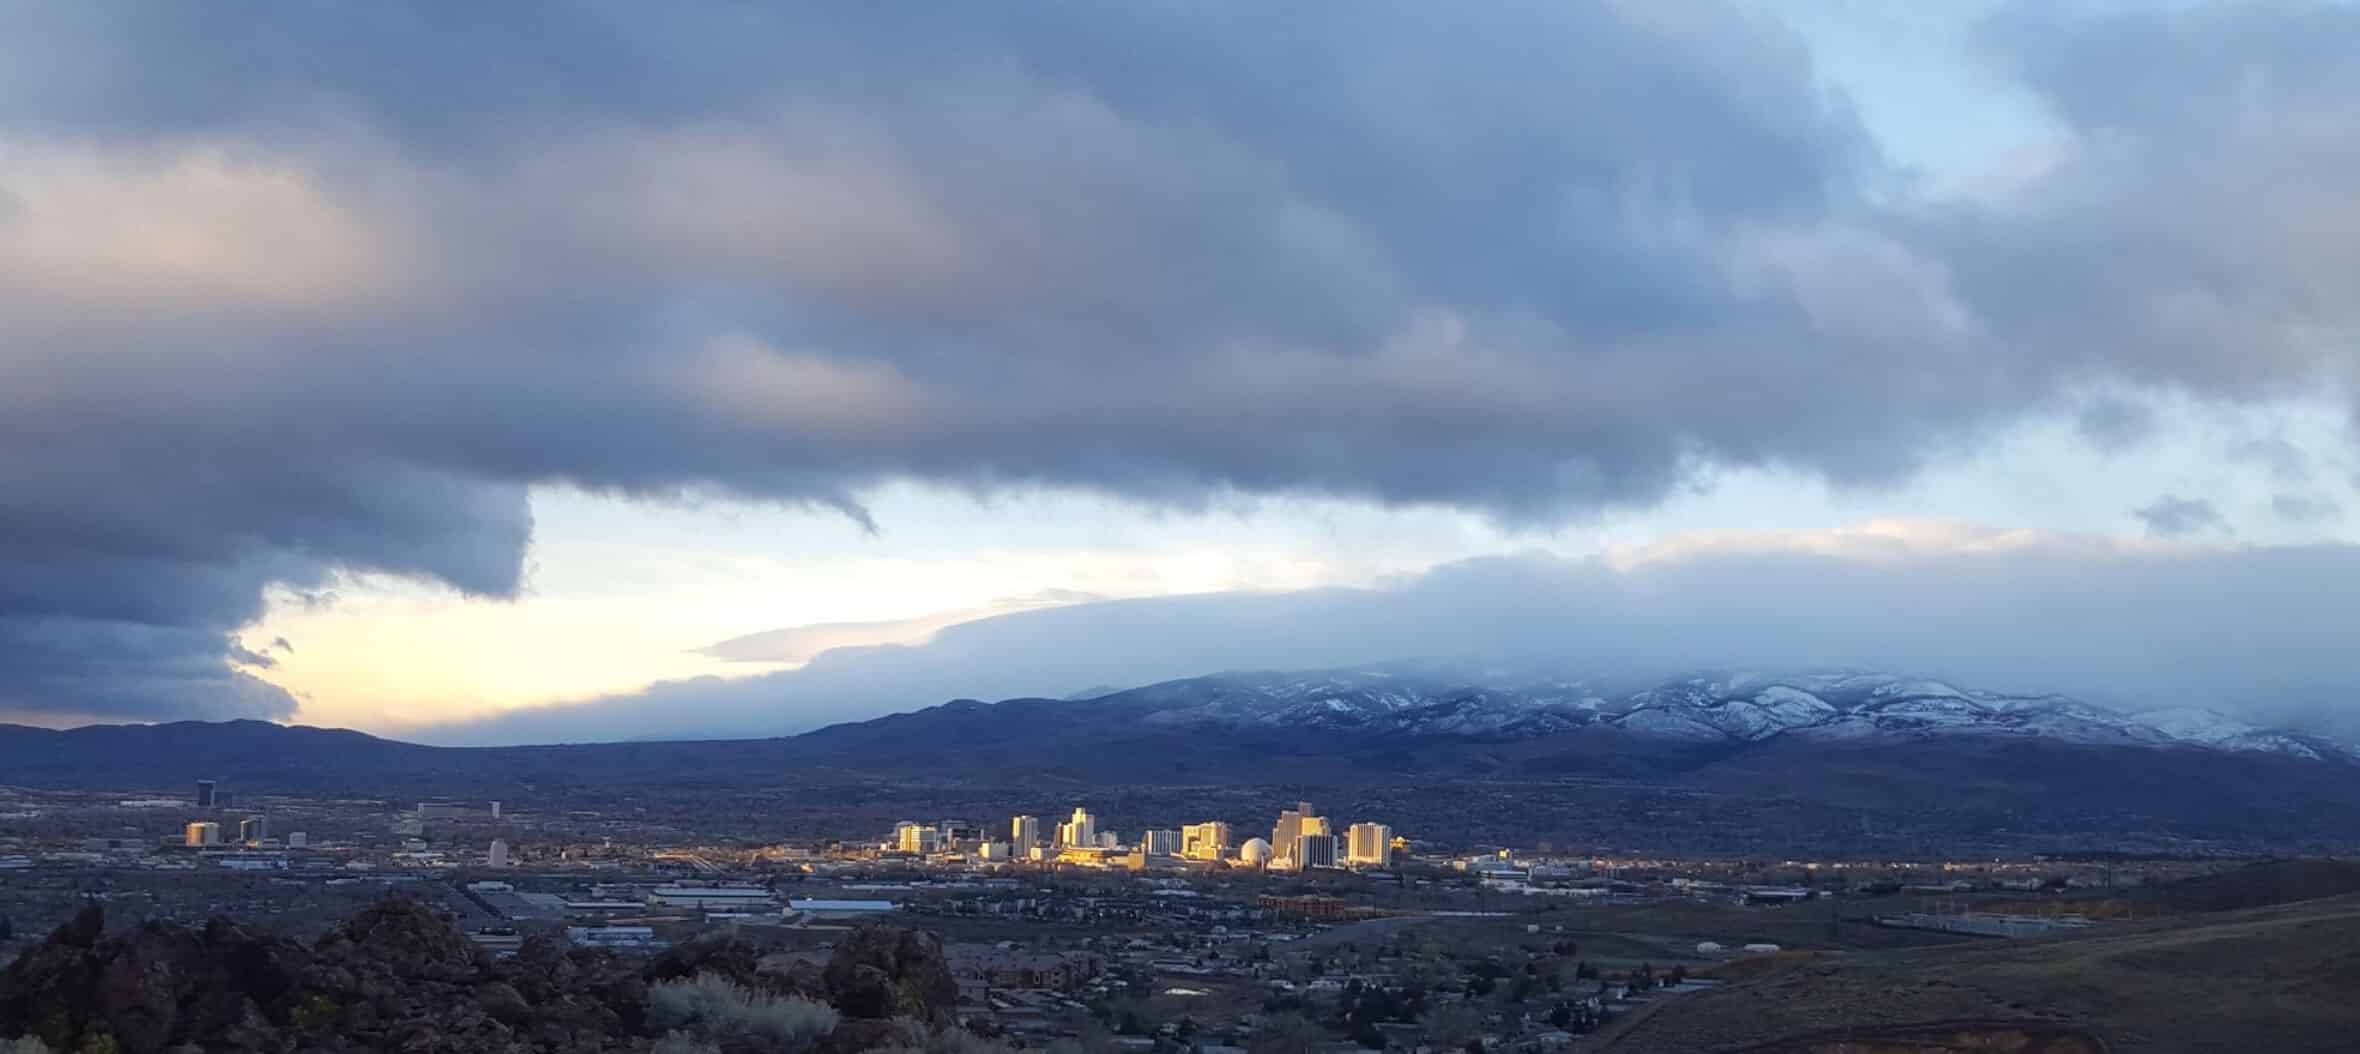 Downtown Reno and the Sierra Nevada with clouds overhead. Credit: NWS Reno